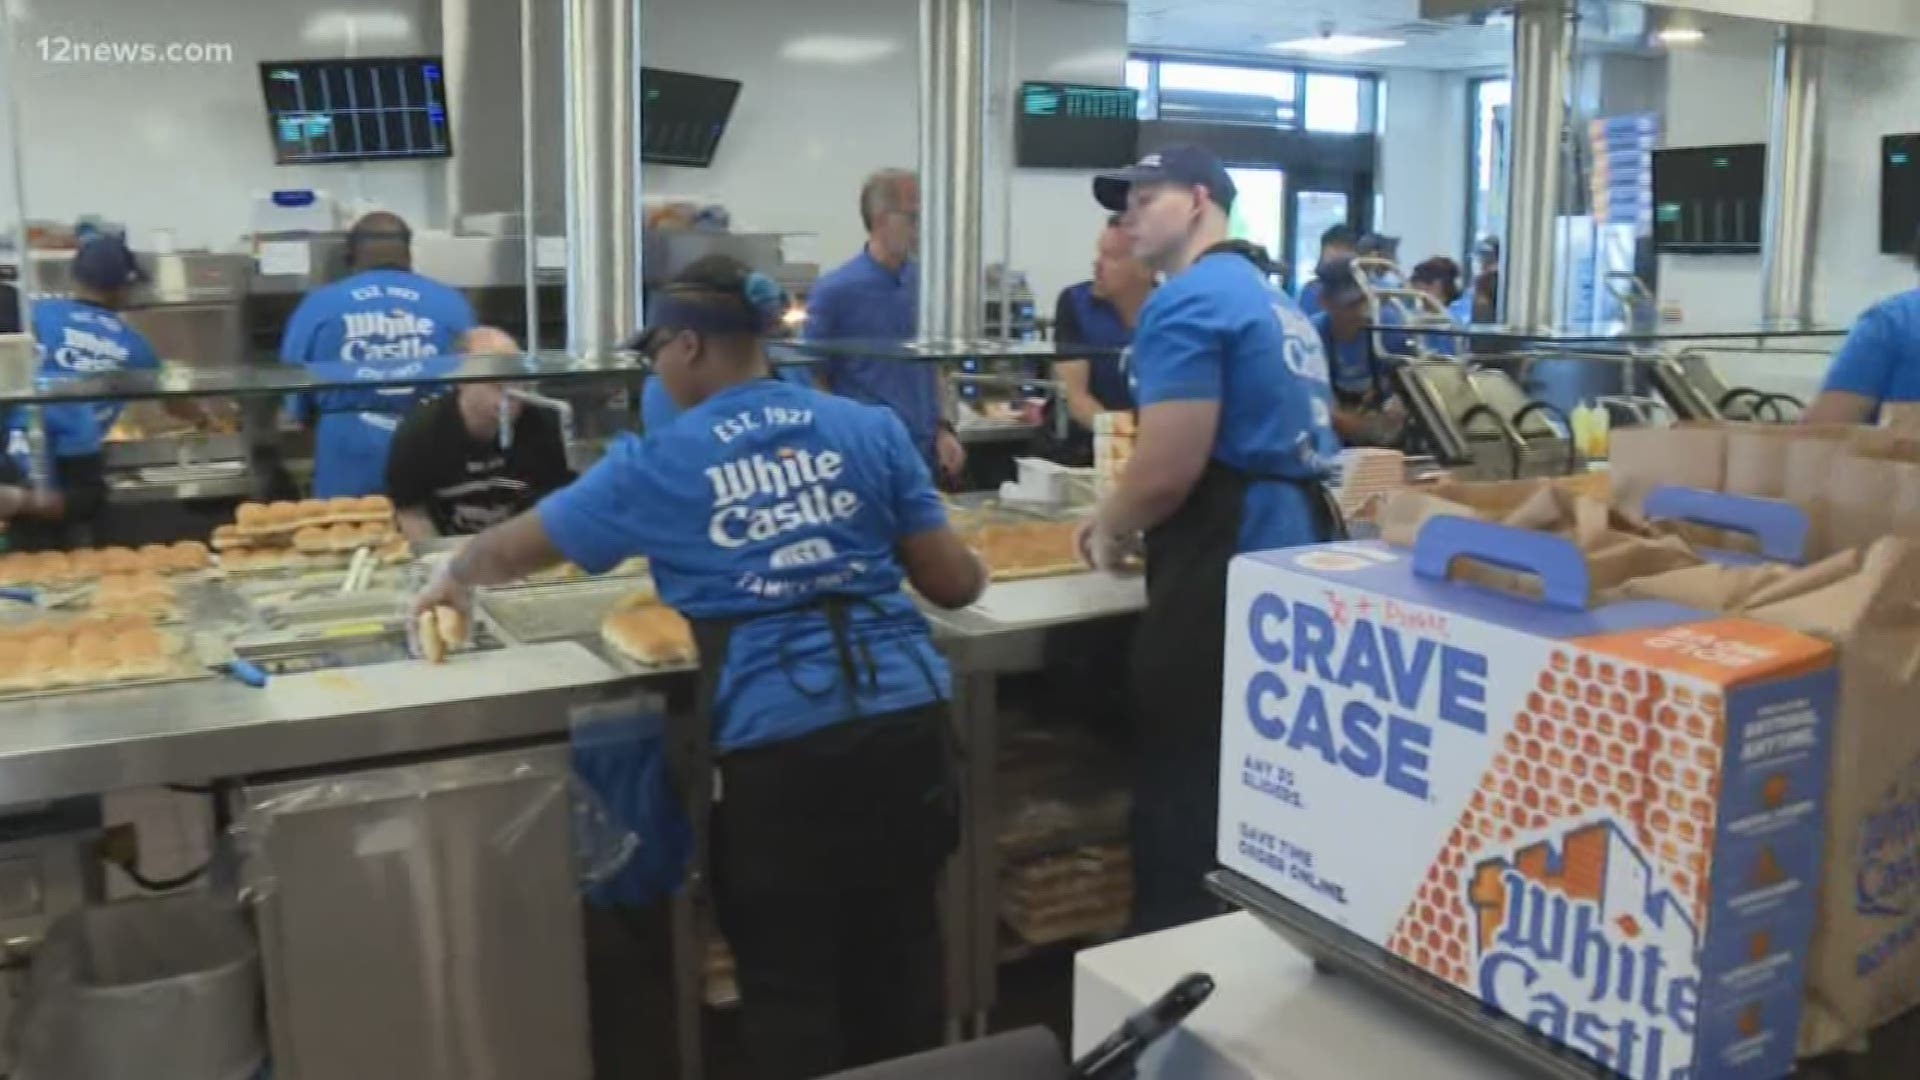 The First at 4 team tried out White Castle hamburgers as the new Arizona opened near Scottsdale. What do they think? Watch the video to see their thoughts about theg